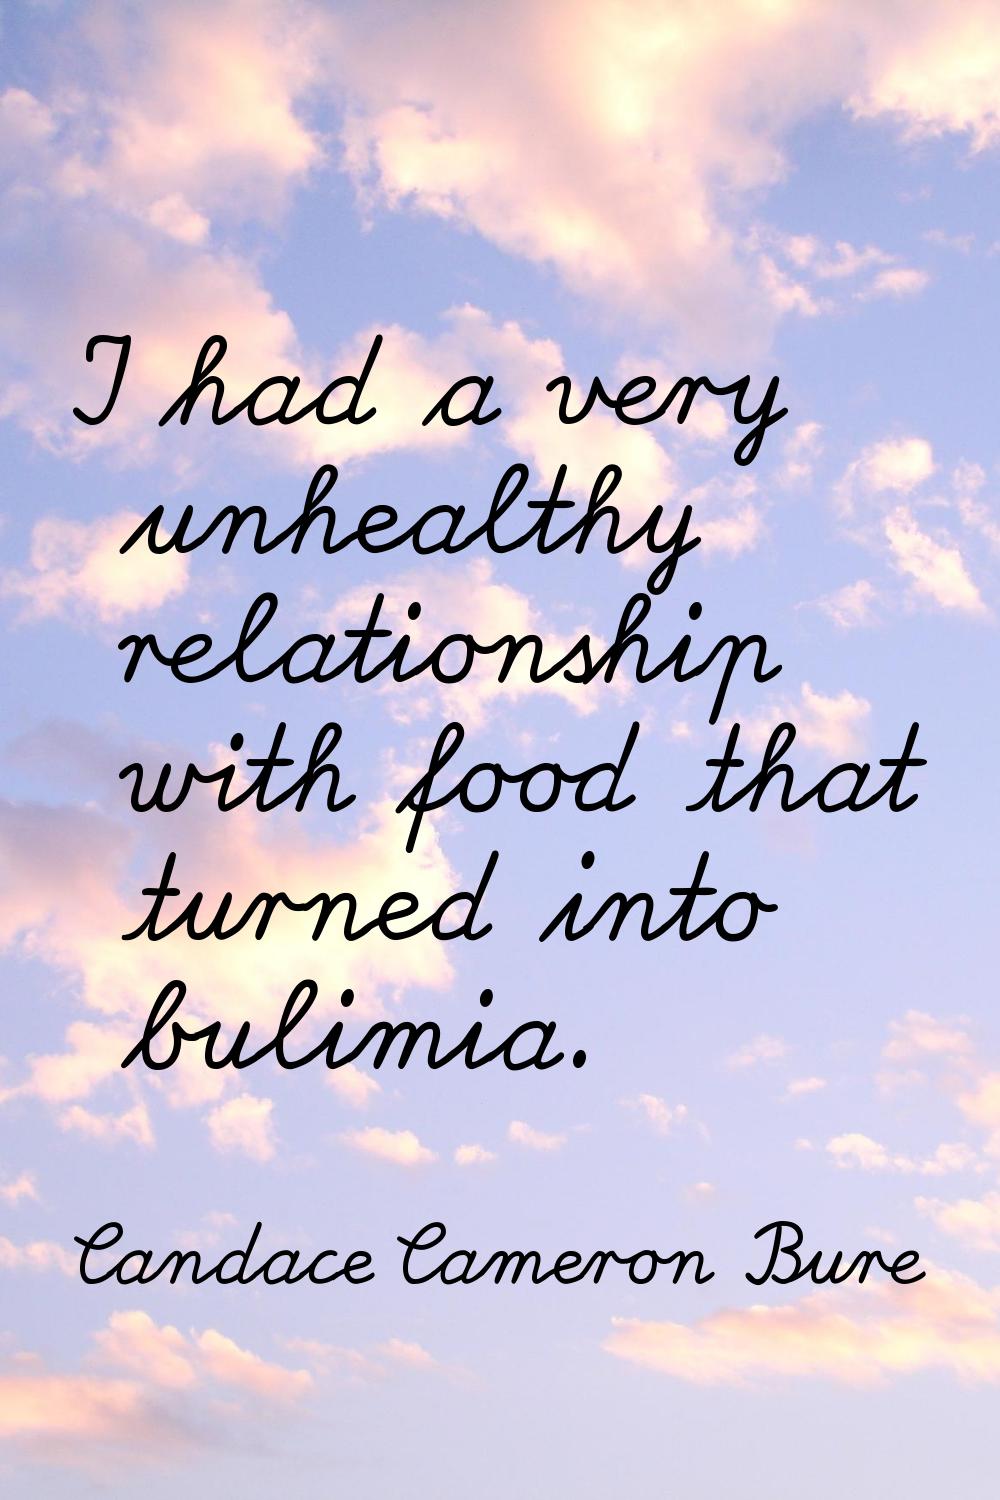 I had a very unhealthy relationship with food that turned into bulimia.